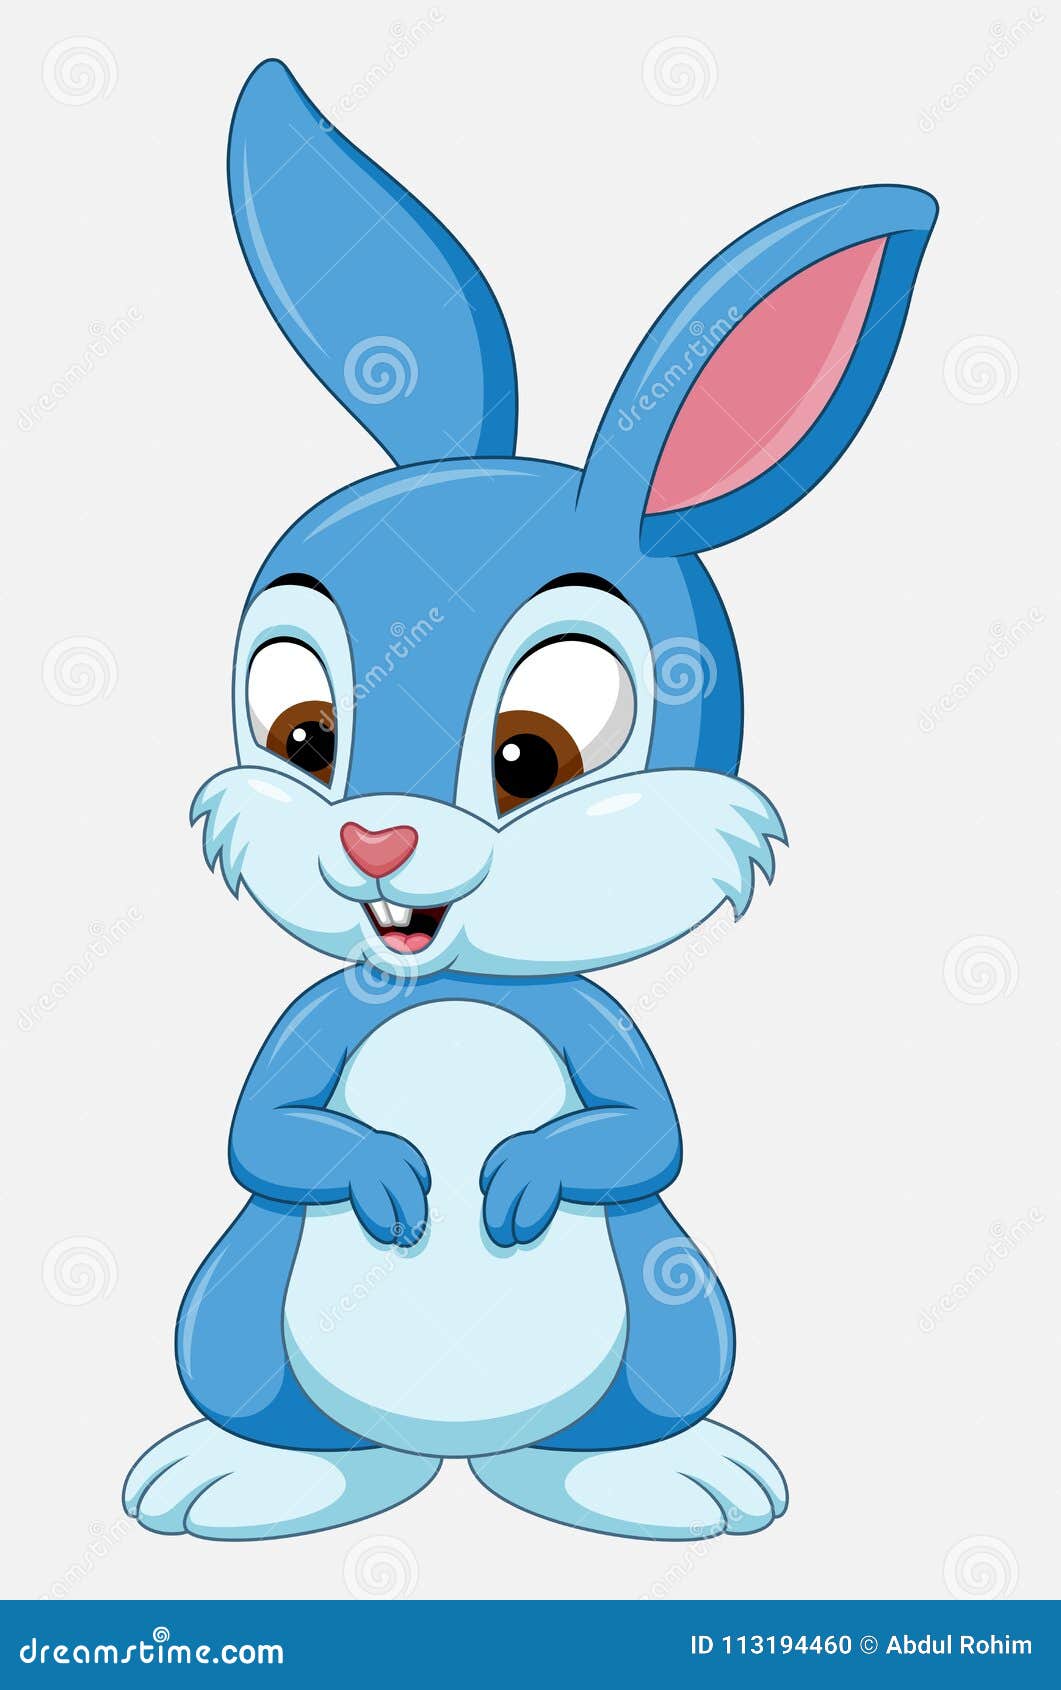 Cute Rabbit Cartoon Isolated on White Background Stock Vector ...